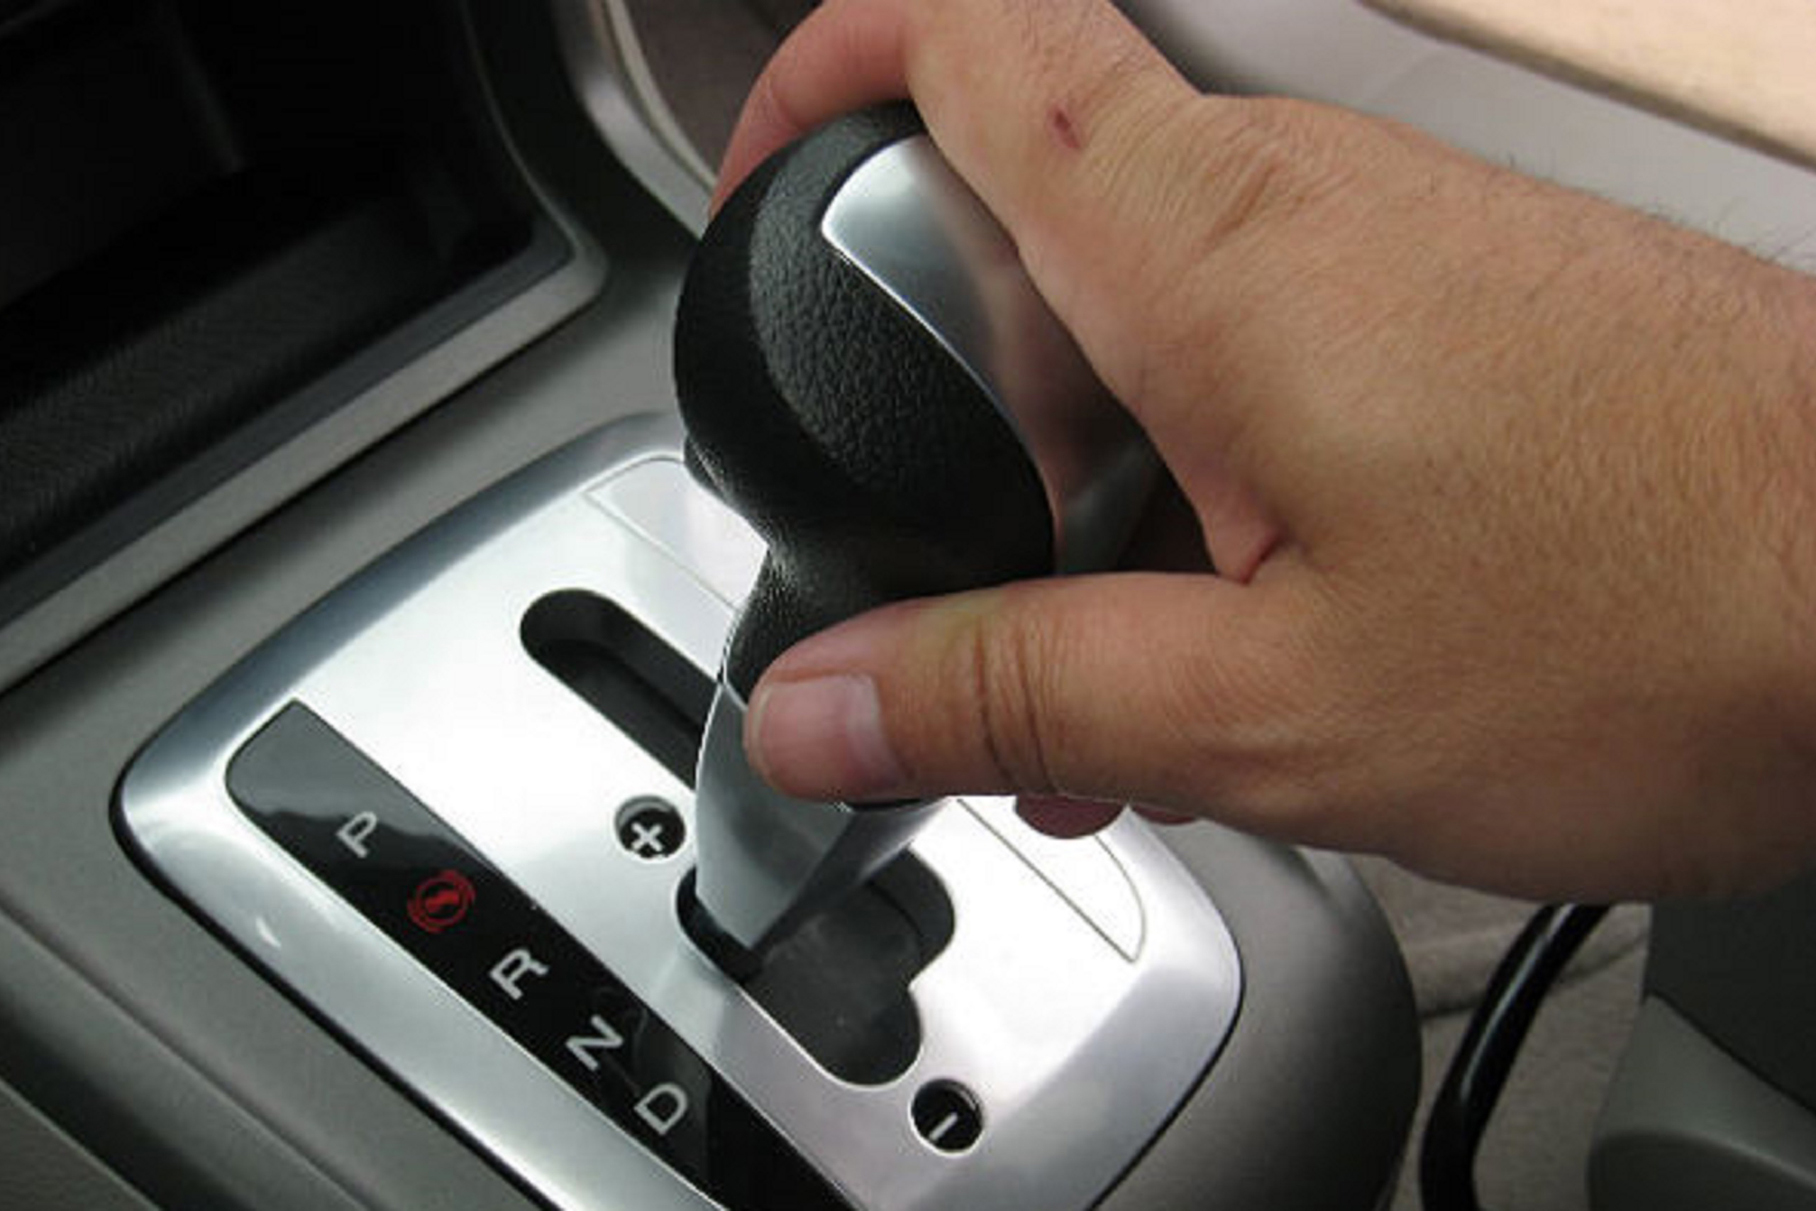 The expert called the automatic transmission the best hope